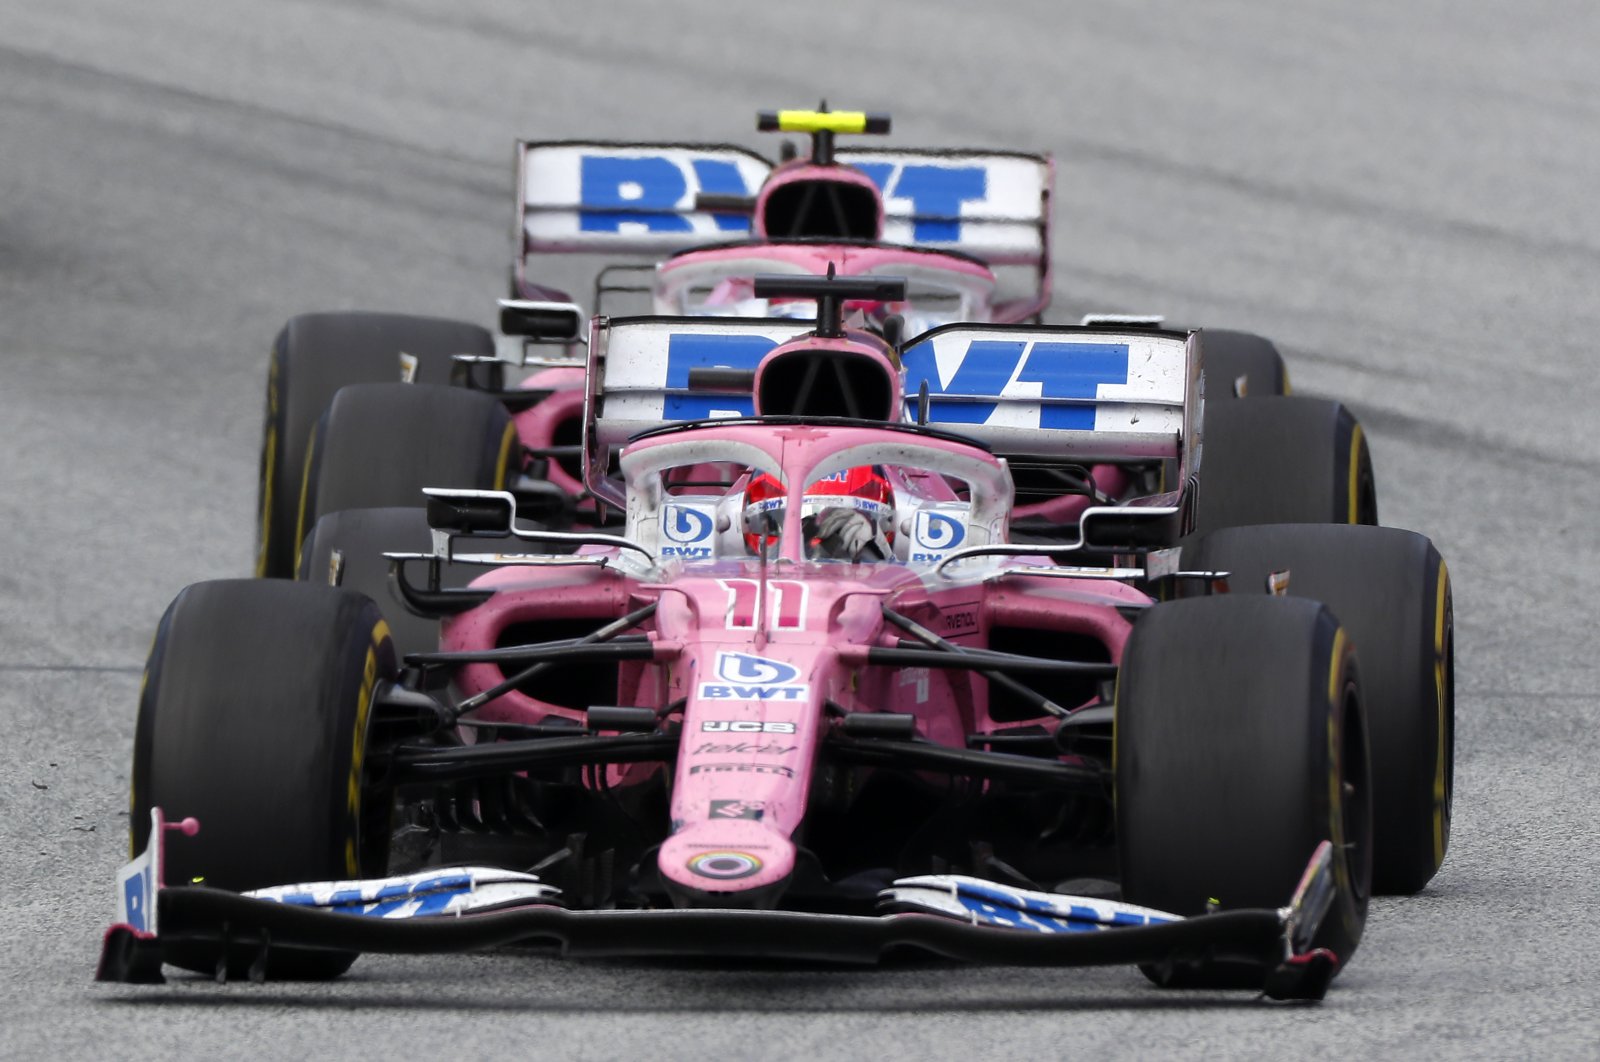 Racing Point driver Sergio Perez steers his car during the race in Spielberg, Austria, July 12, 2020. (AP Photo)